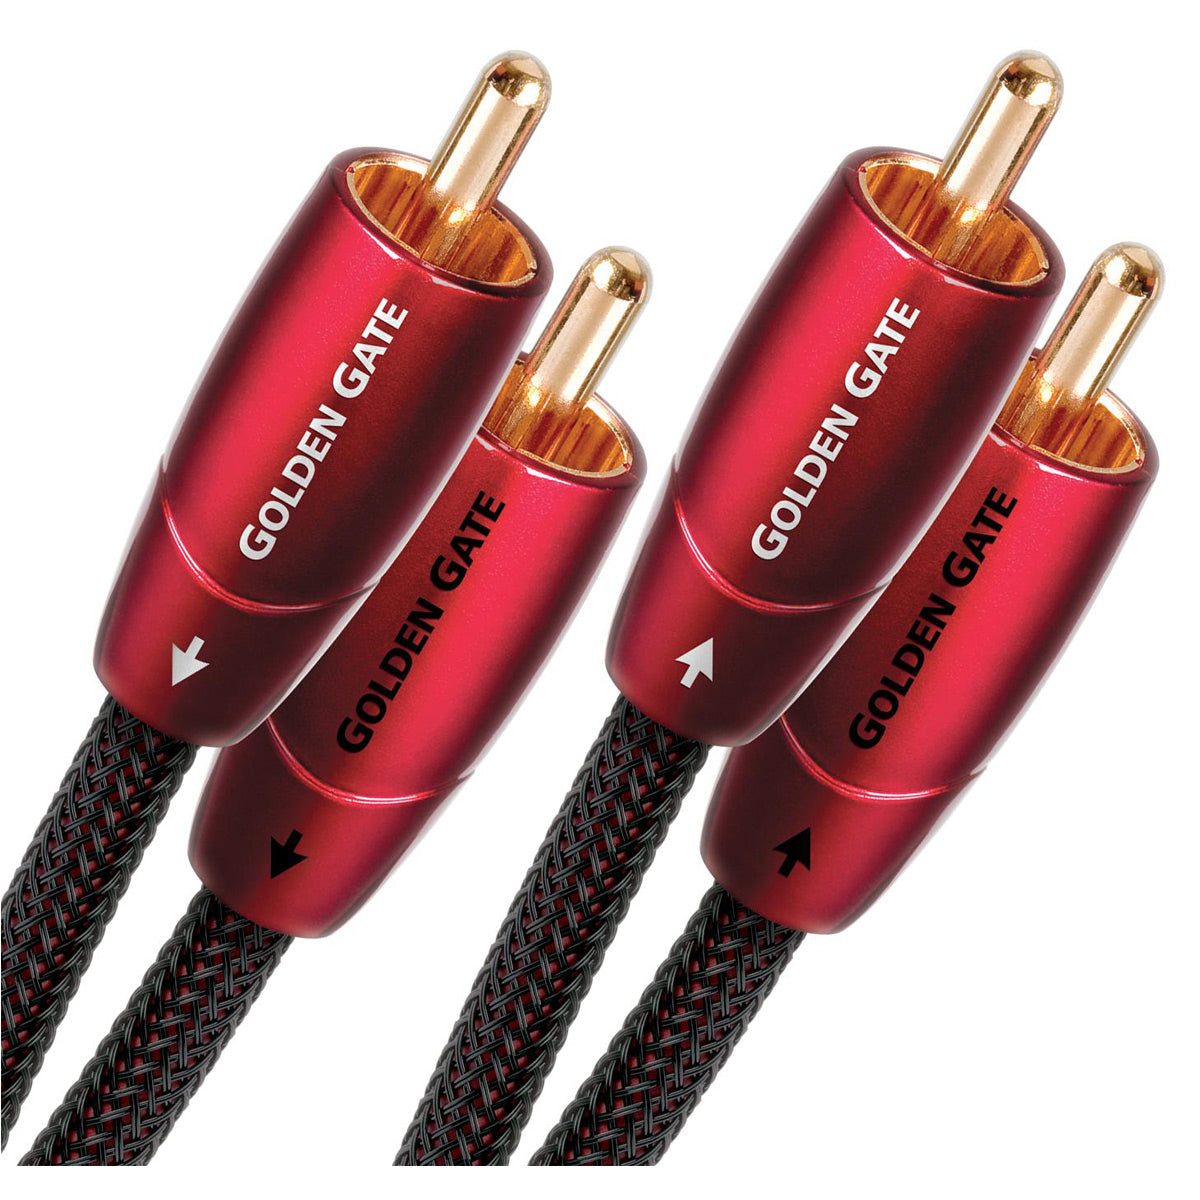 AudioQuest Golden Gate RCA Male to RCA Male Cable - 16.4 ft. (5m)